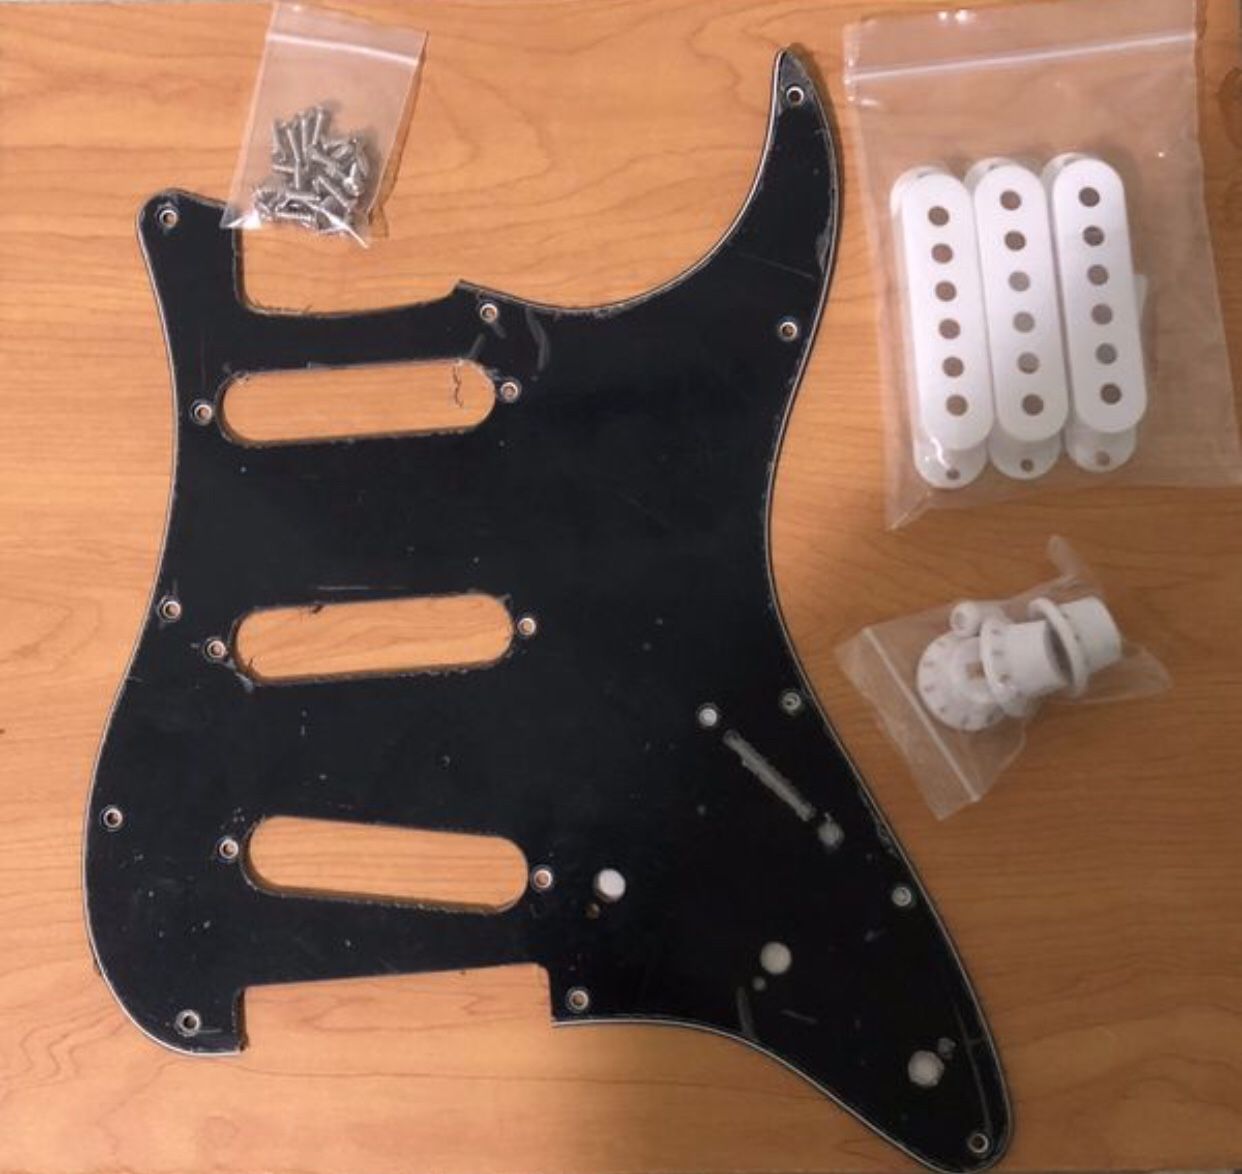 FENDER OR SQUIER STRAT GUITAR, BLACK PICKGUARD 11 HOLE with 11 Silver or Black Screws and White Plastic 3 Pickup Covers / 3 Knobs / Switch Tip, Bass